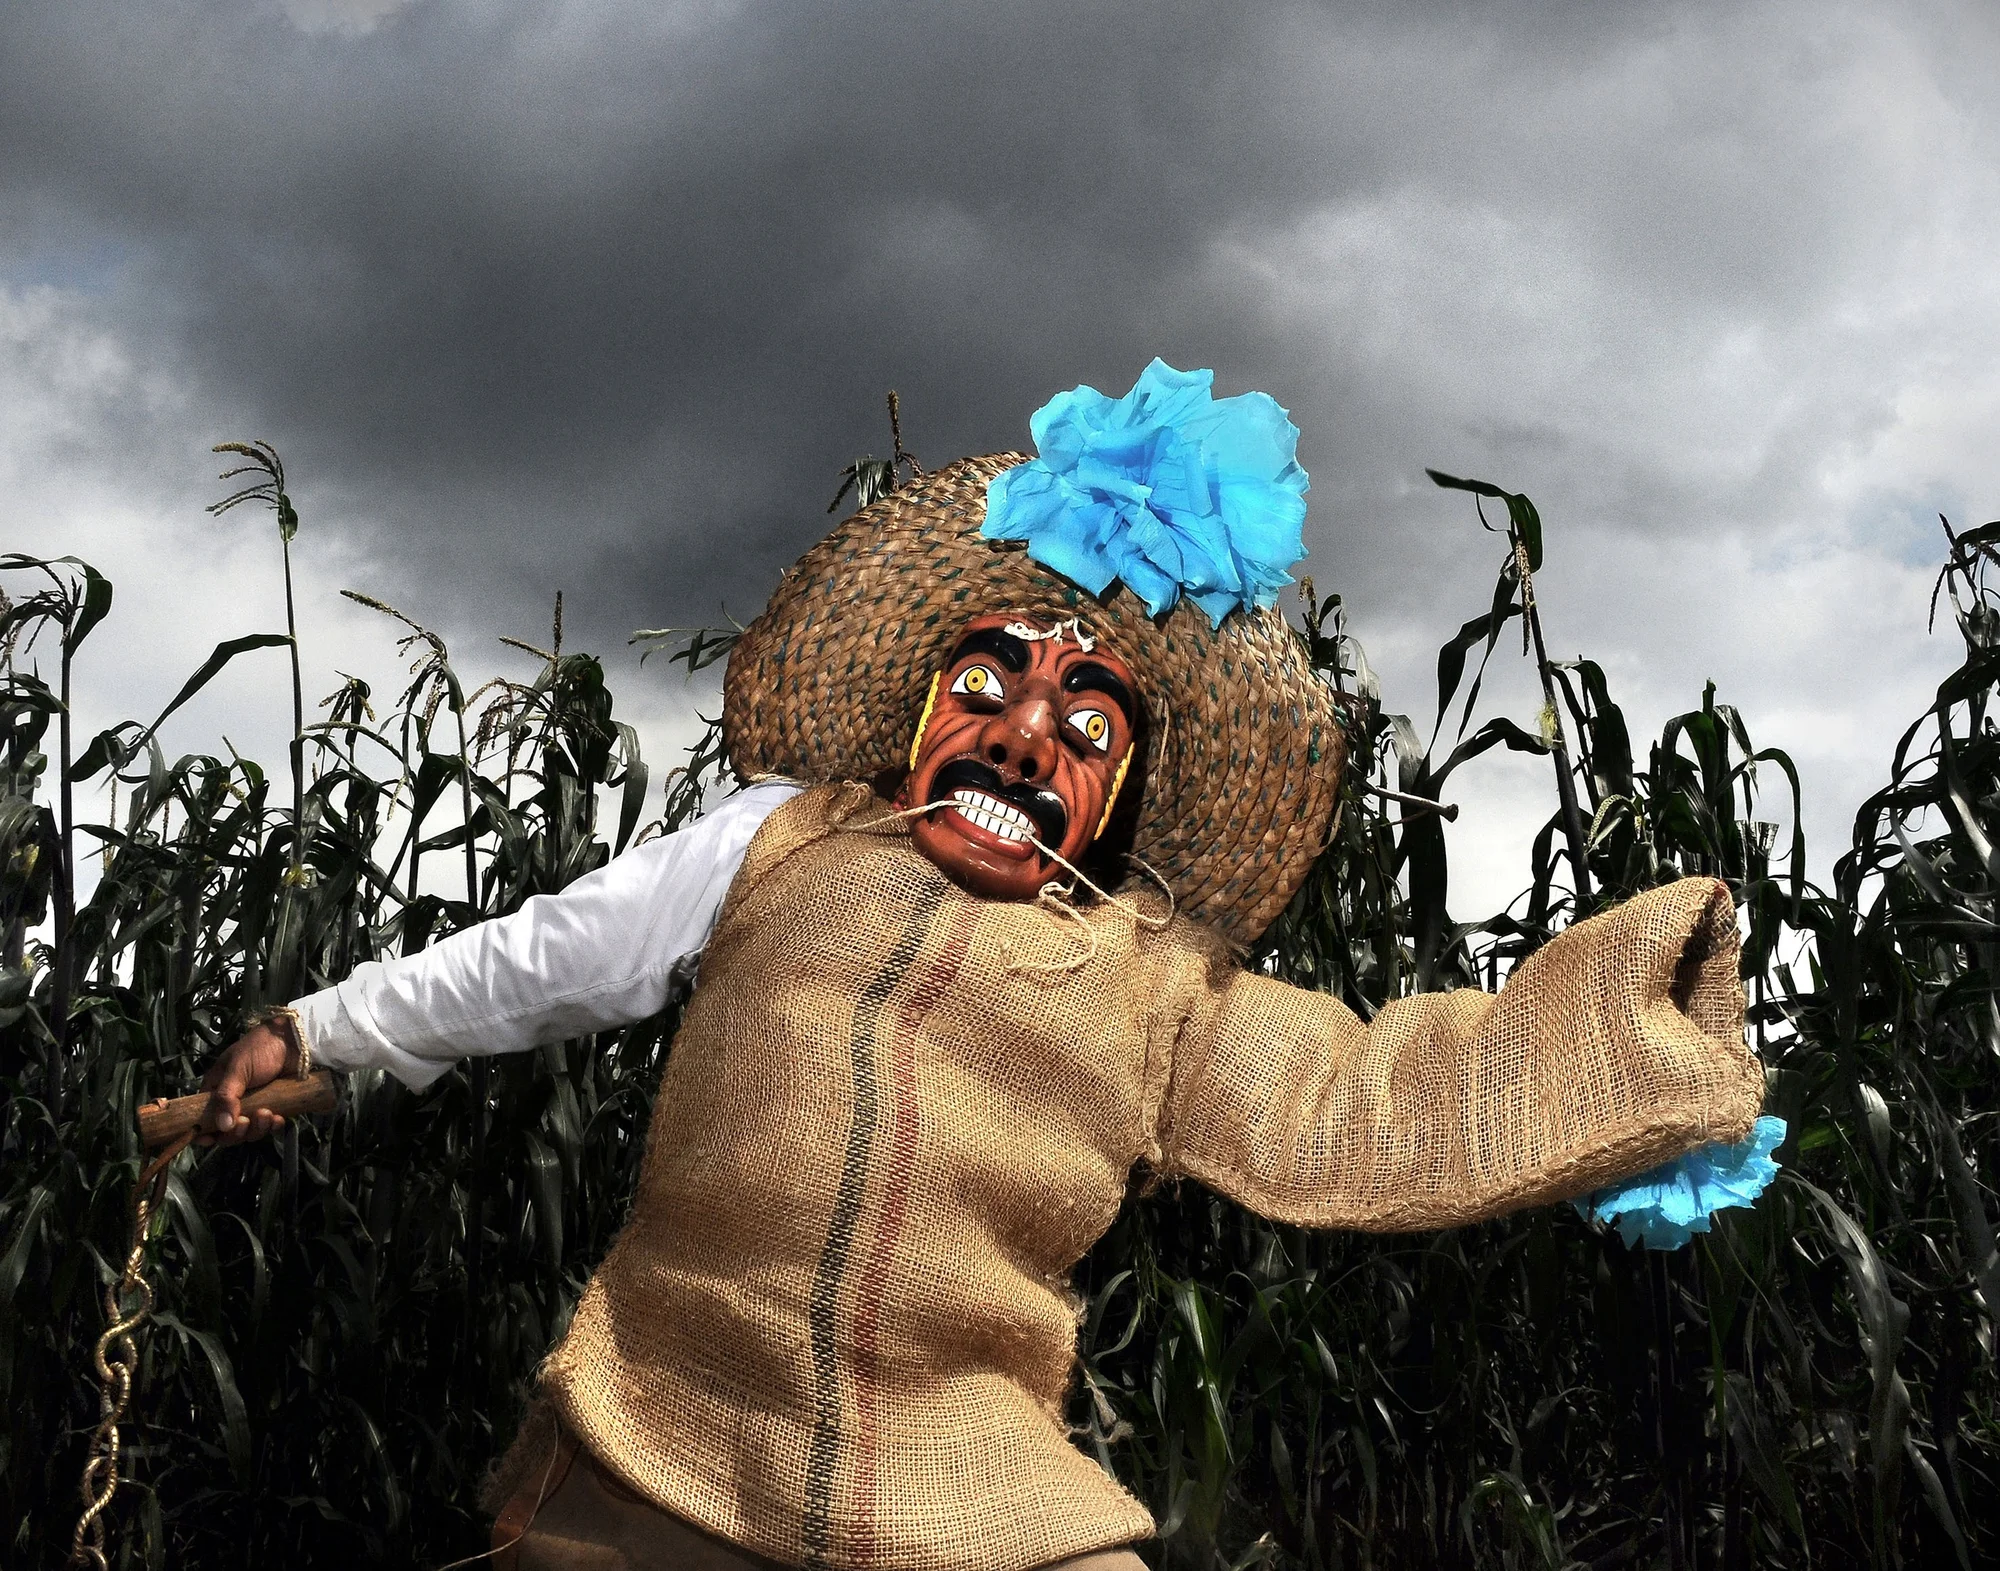 A person wearing a colorful mask and a hat stands in a corn field